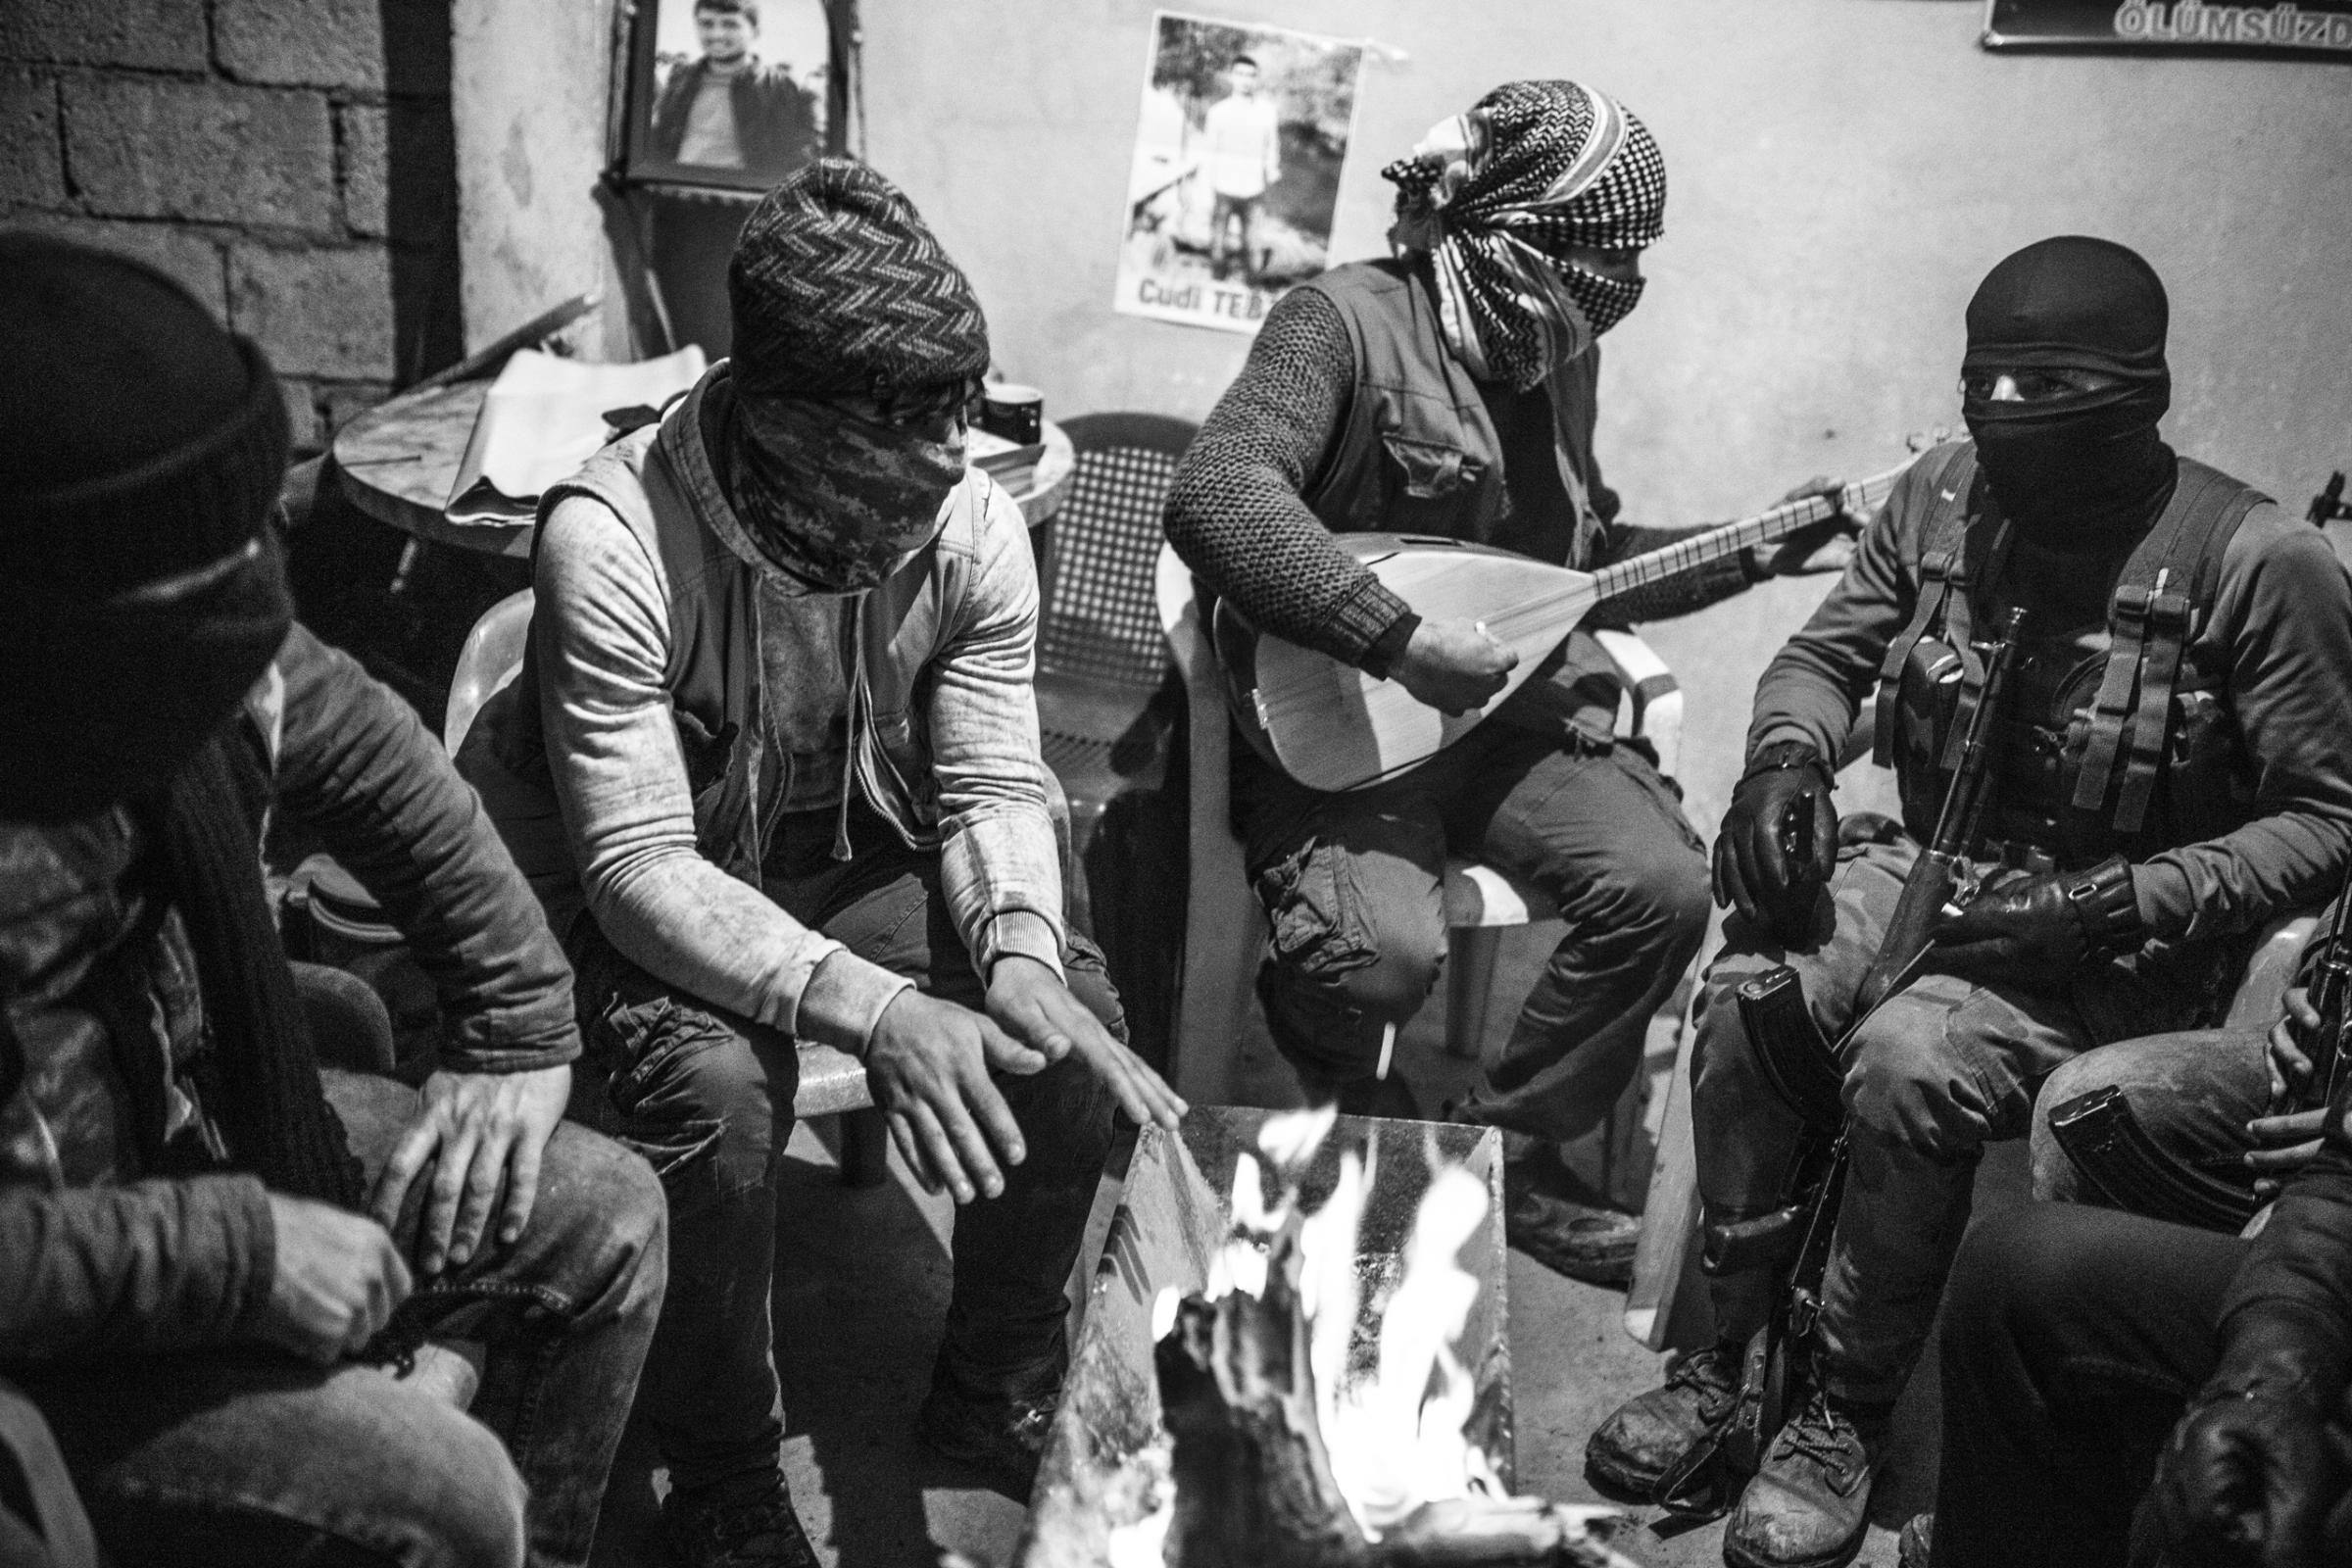 Members of the Civil Protection Units (YPS), a Kurdish rebel group, warm up and play music near a fire in the YPS headquarters in Nusaybin, Turkey, Jan. 2016. The YPS was formed at the end of 2015 as a result of curfews imposed by the Turkish security forces and increased clashes.